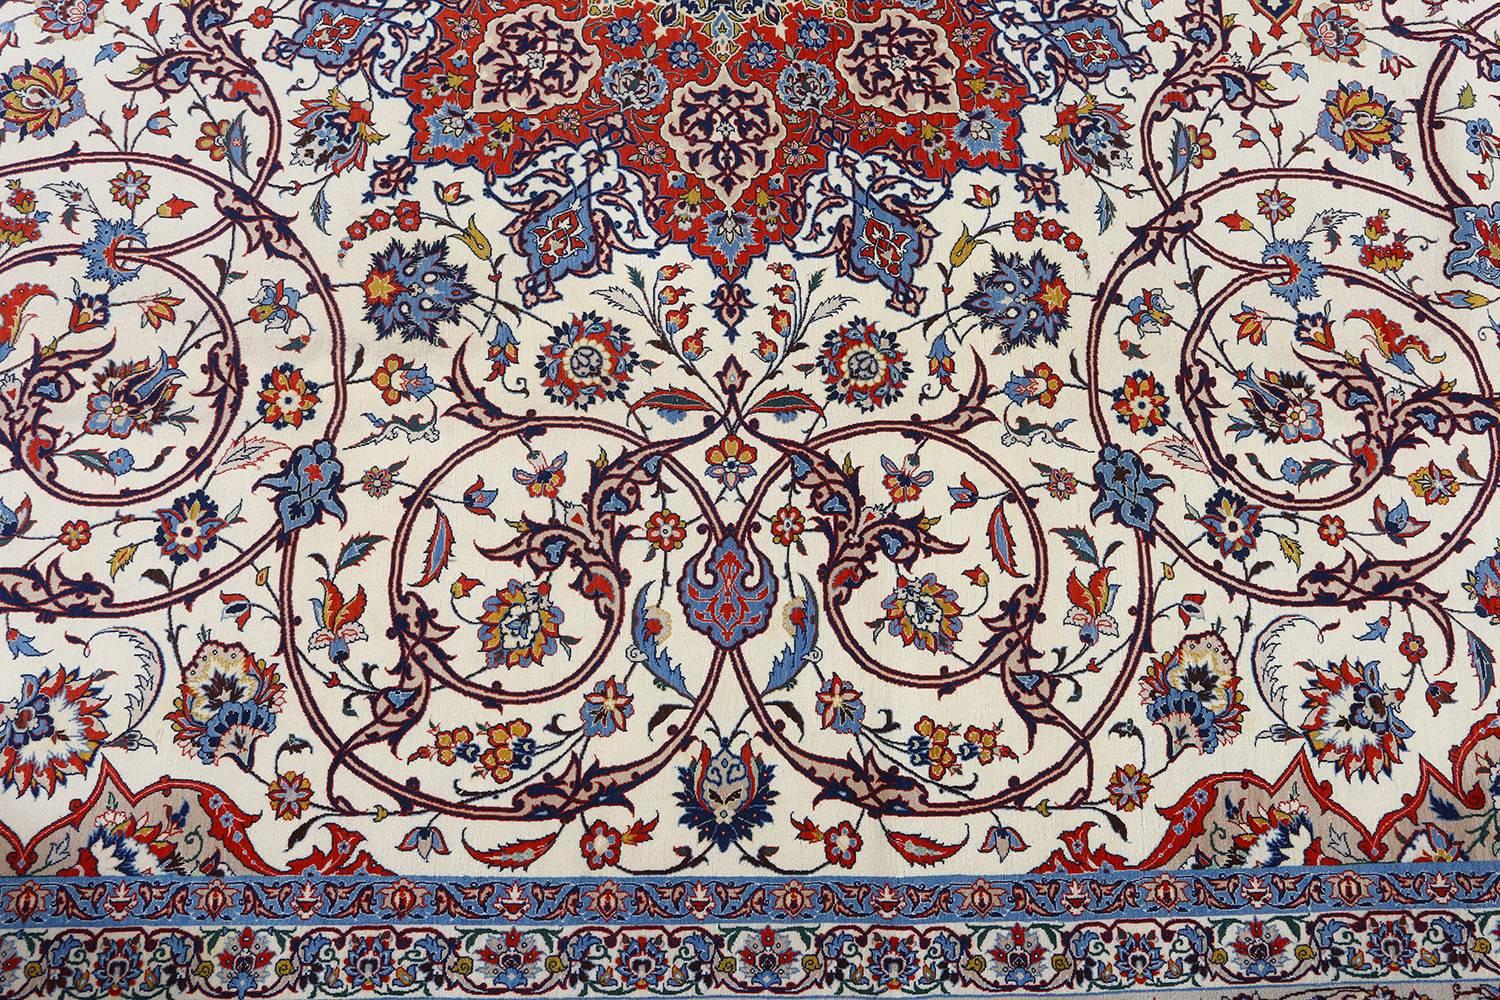 20th Century Fine Vintage Isfahan Persian Rug. Size: 10 ft 2 in x 14 ft 7 in (3.1 m x 4.44 m)